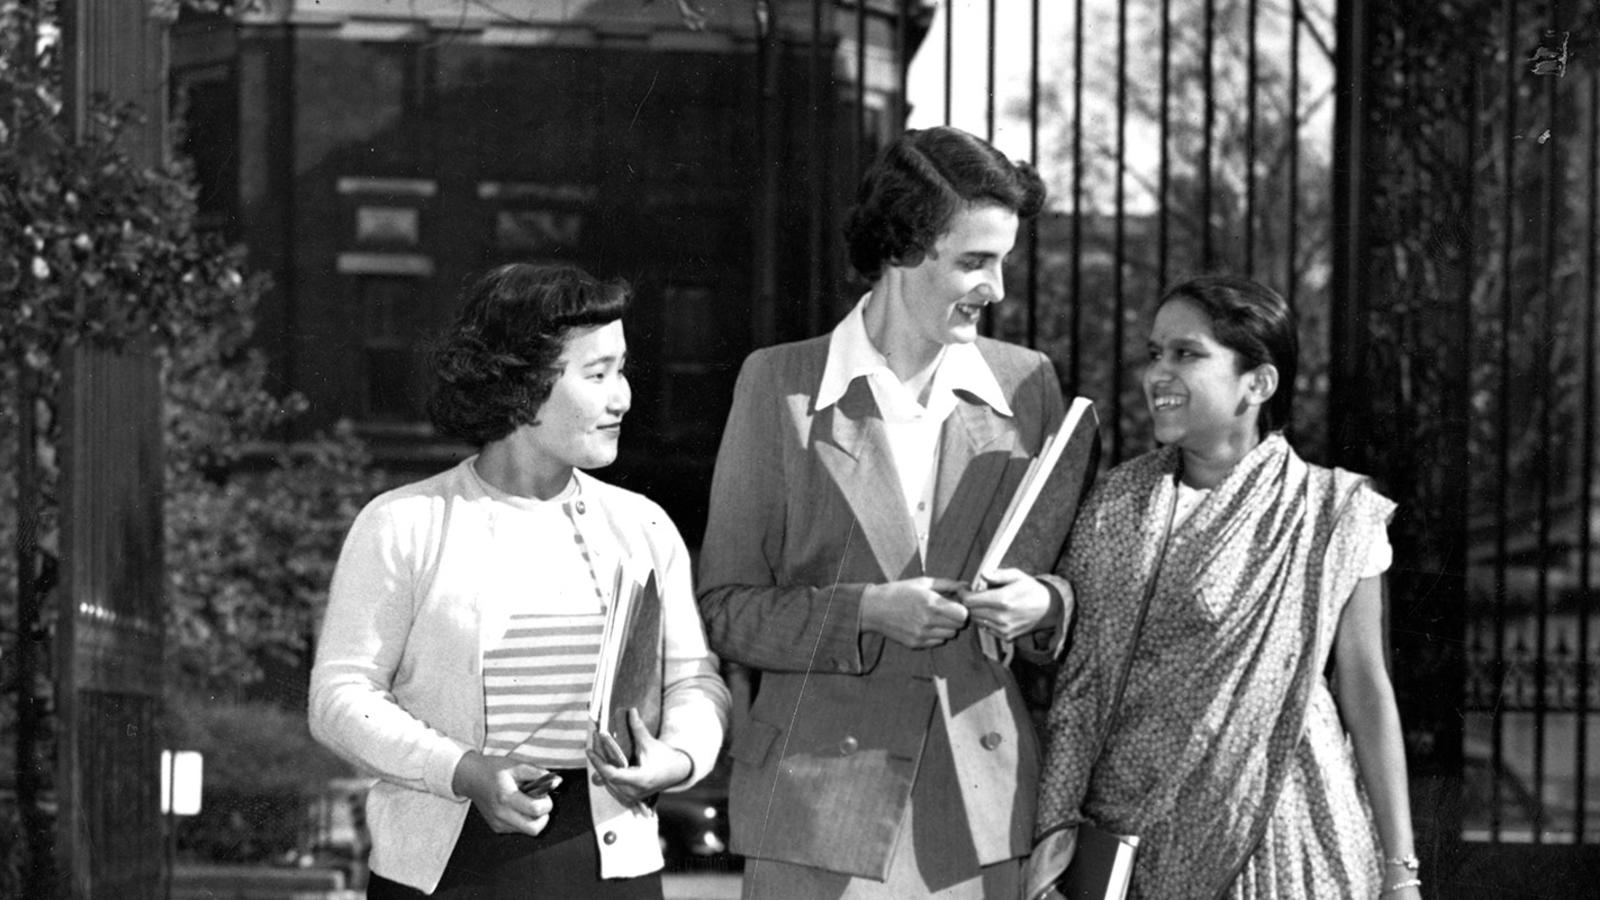 3 students at the Barnard gate in 1950, black and white